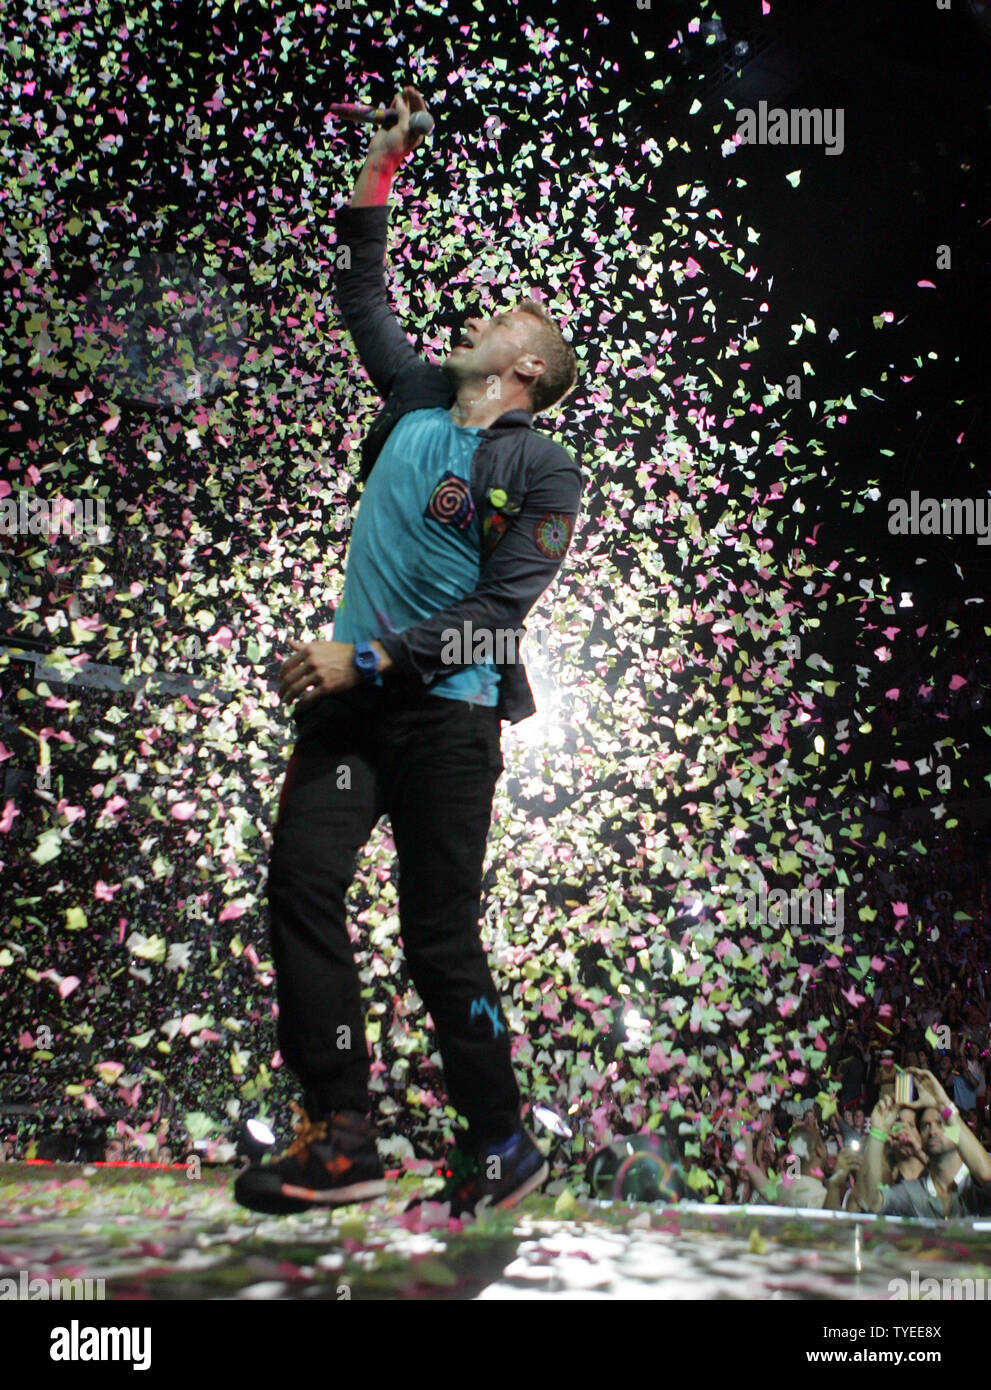 Chris Martin with Coldplay performs in concert on their Mylo Xyloto tour 2012 at the American Airlines Arena in Miami on June 29, 2012. UPI/Michael Bush Stock Photo